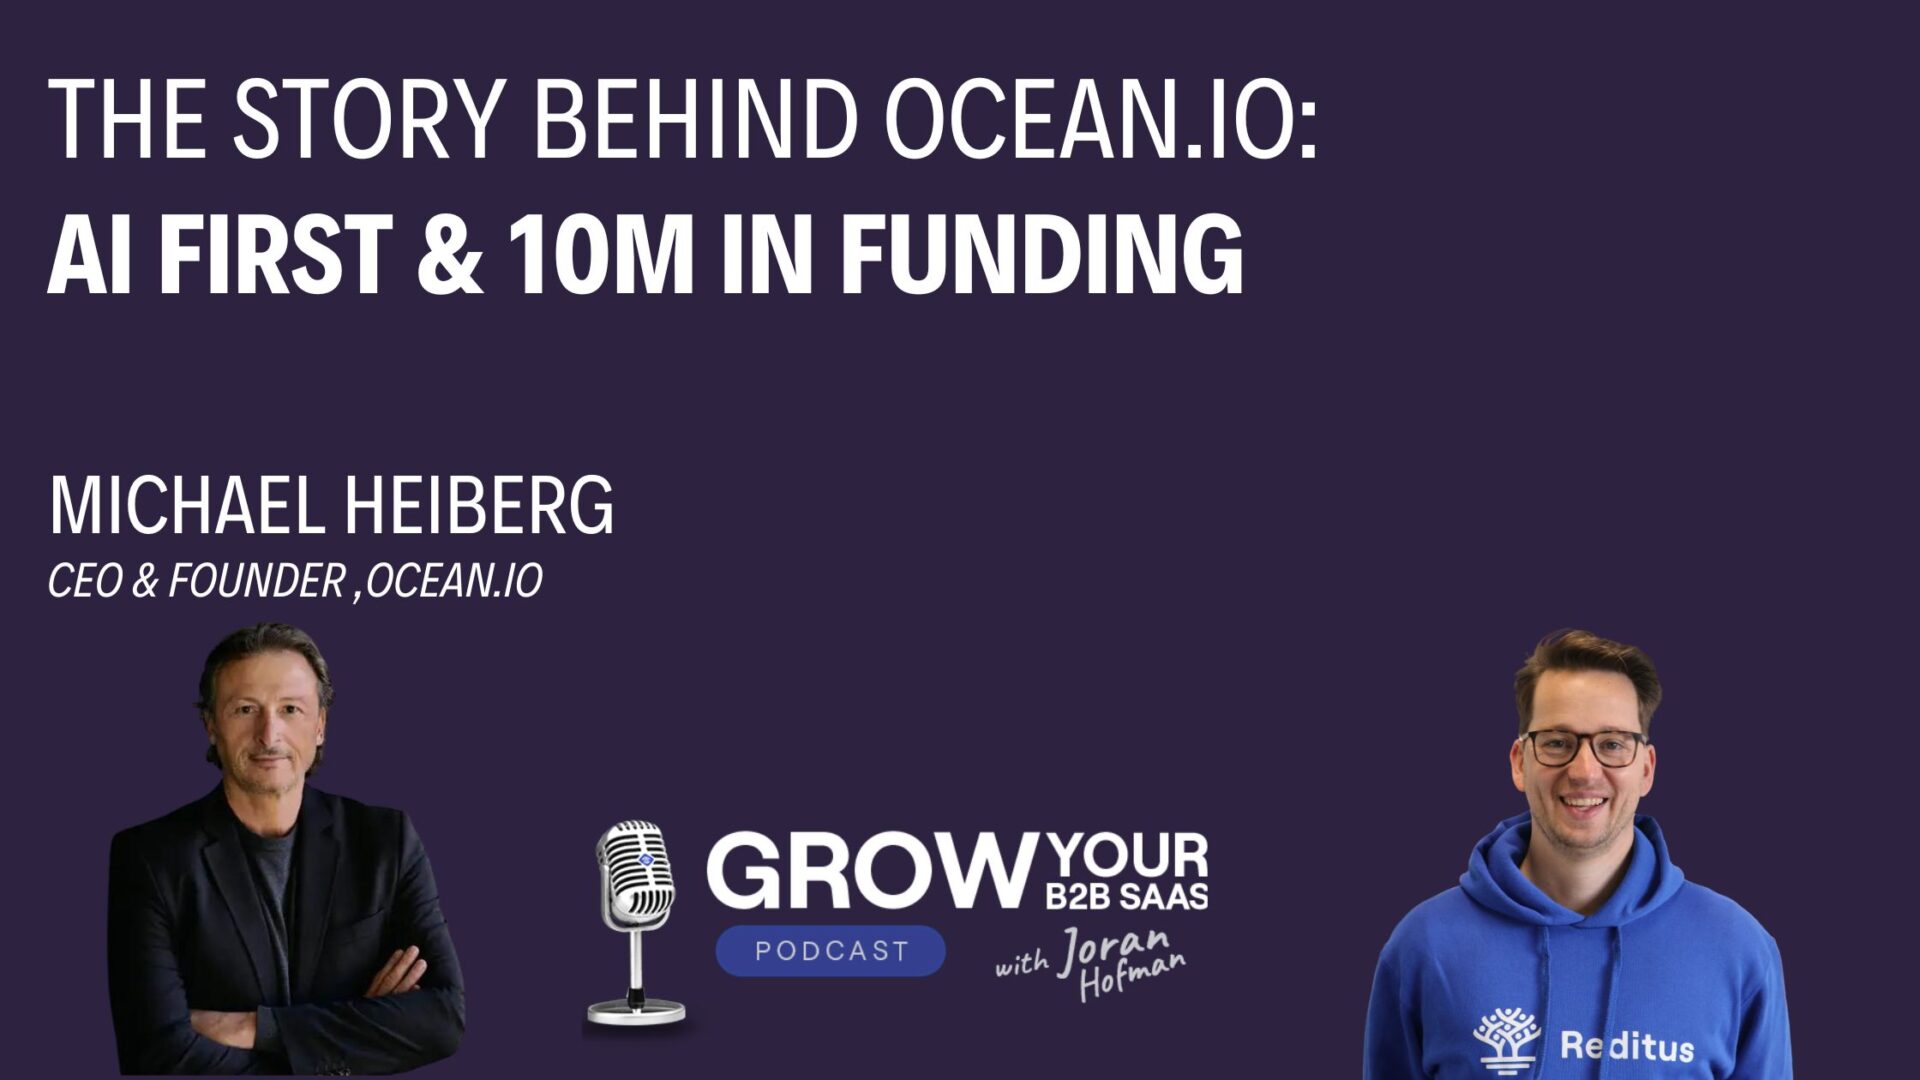 https://www.getreditus.com/podcast/s4e4-the-story-behind-ocean-io-ai-first-10m-in-funding-with-michael-heiberg/